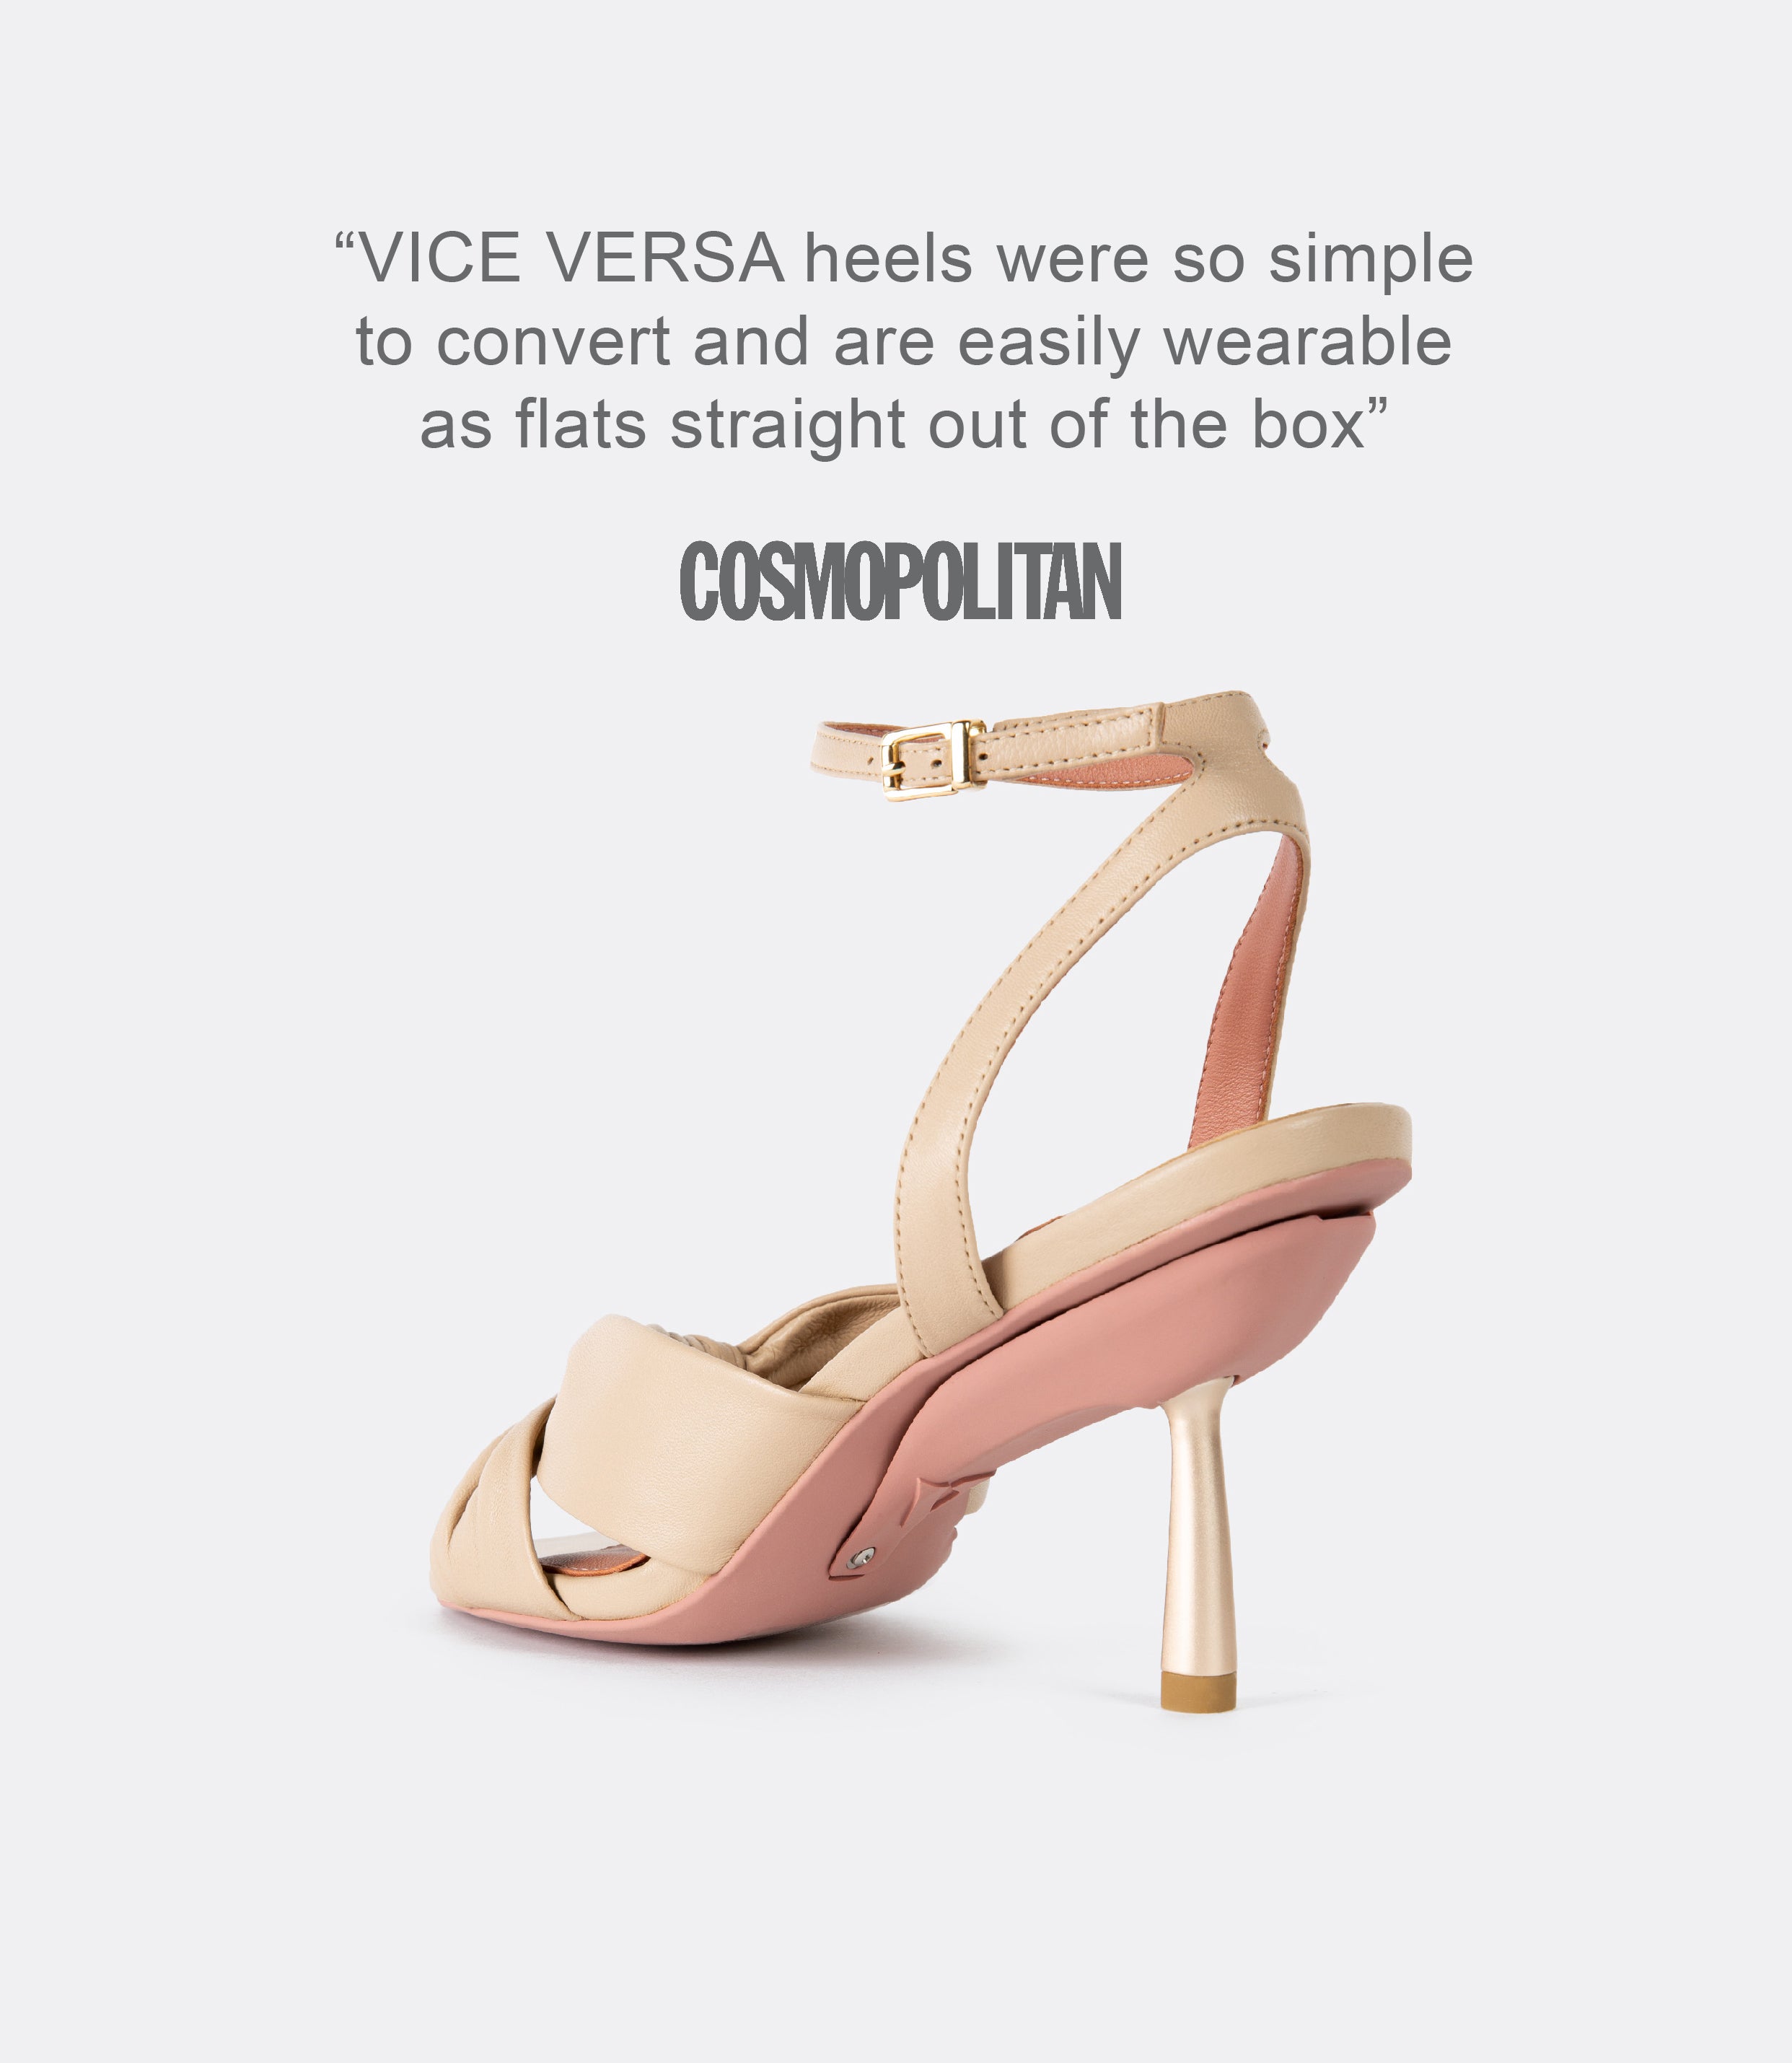 A quote from Cosmopolitan and a back view of a beige leather sandal heel